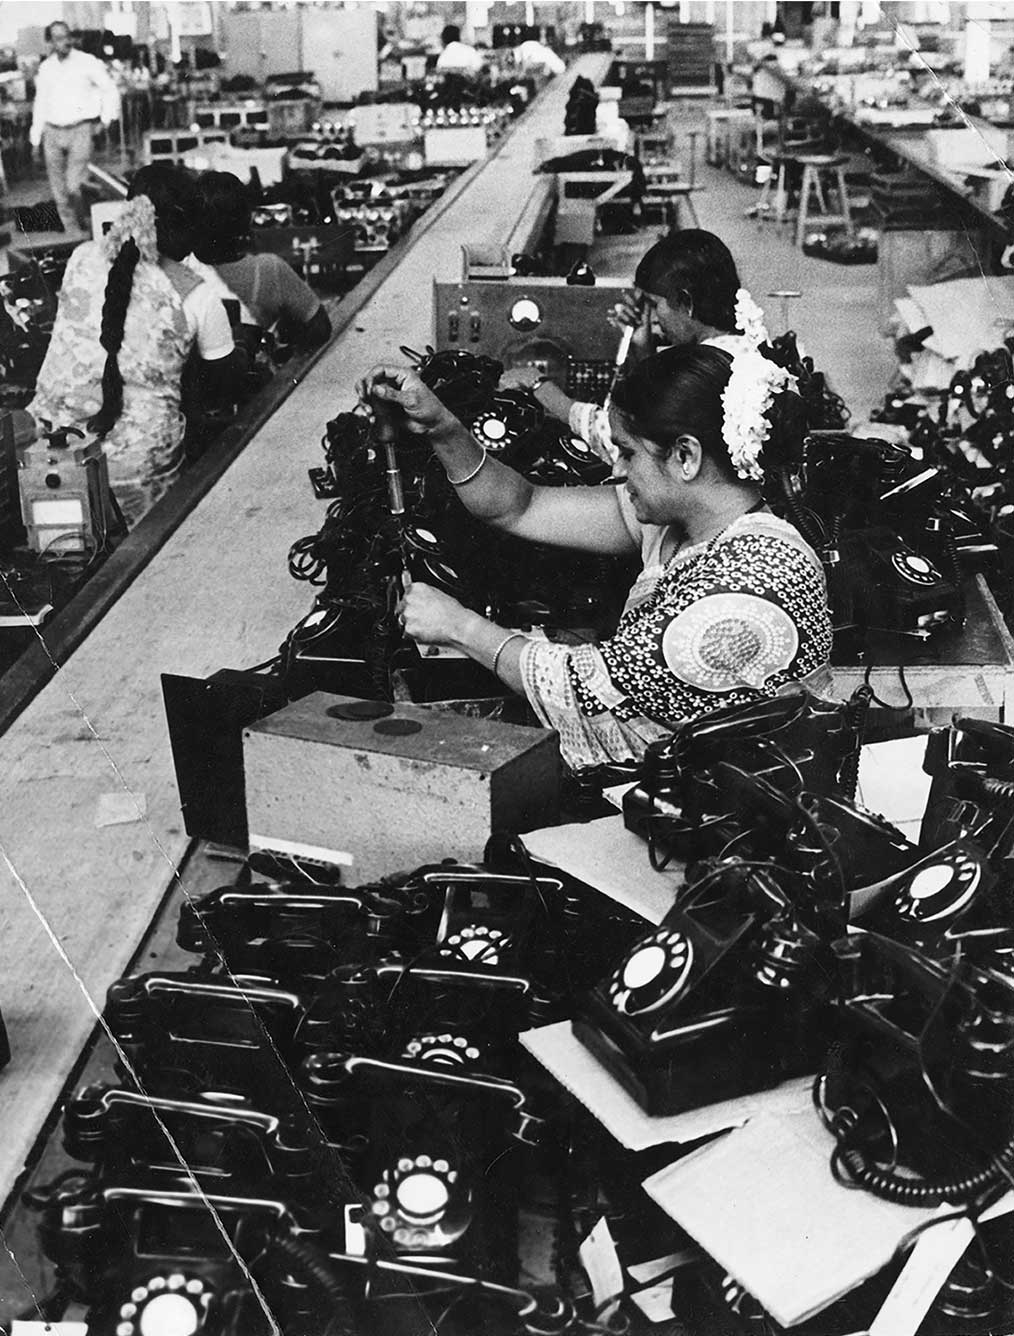 In the foreground are a number of old-school telephones with rotary dials. Behind, women with flowers in their hair sit next to each other as they assemble more such telephones. One man is seen in the background, at the top left corner.